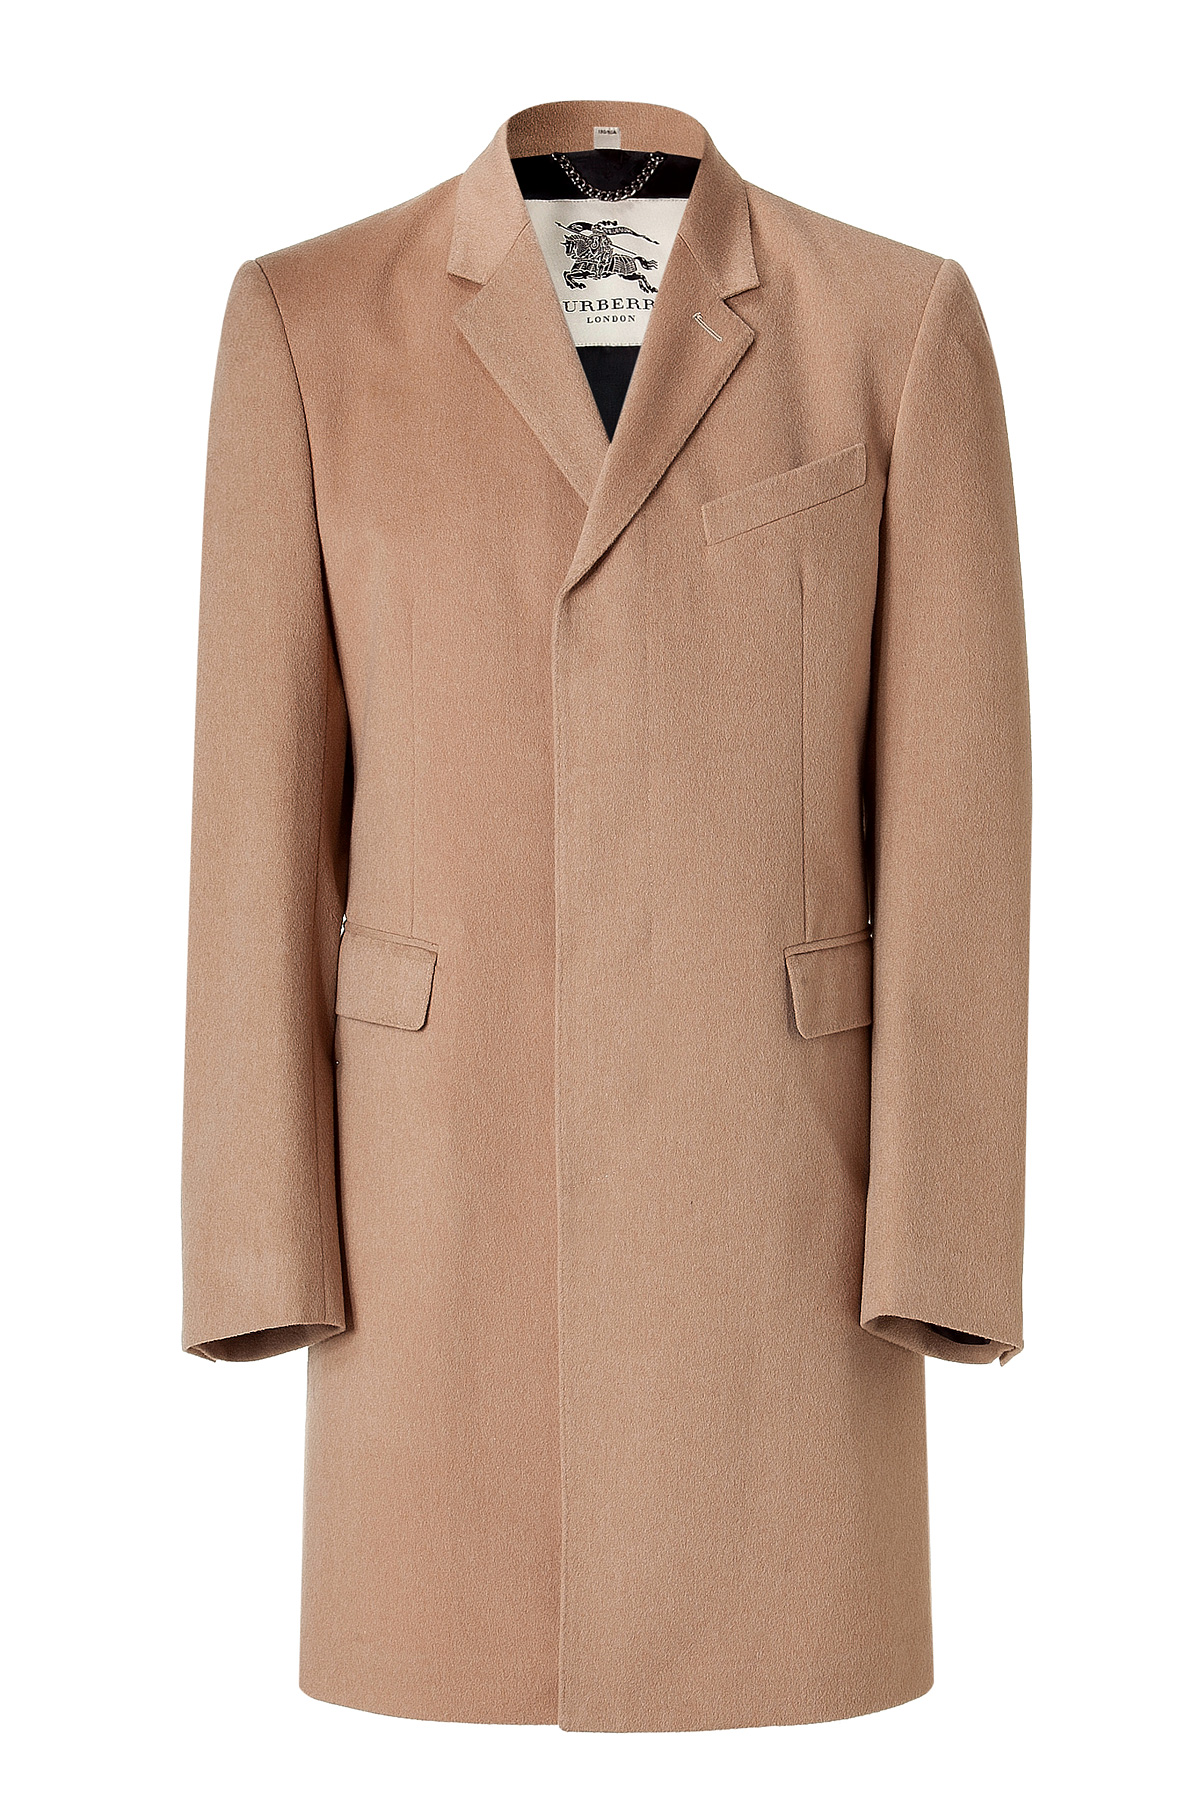 Burberry Camel Wool Coat with Concealed Buttons in Beige for Men (camel ...